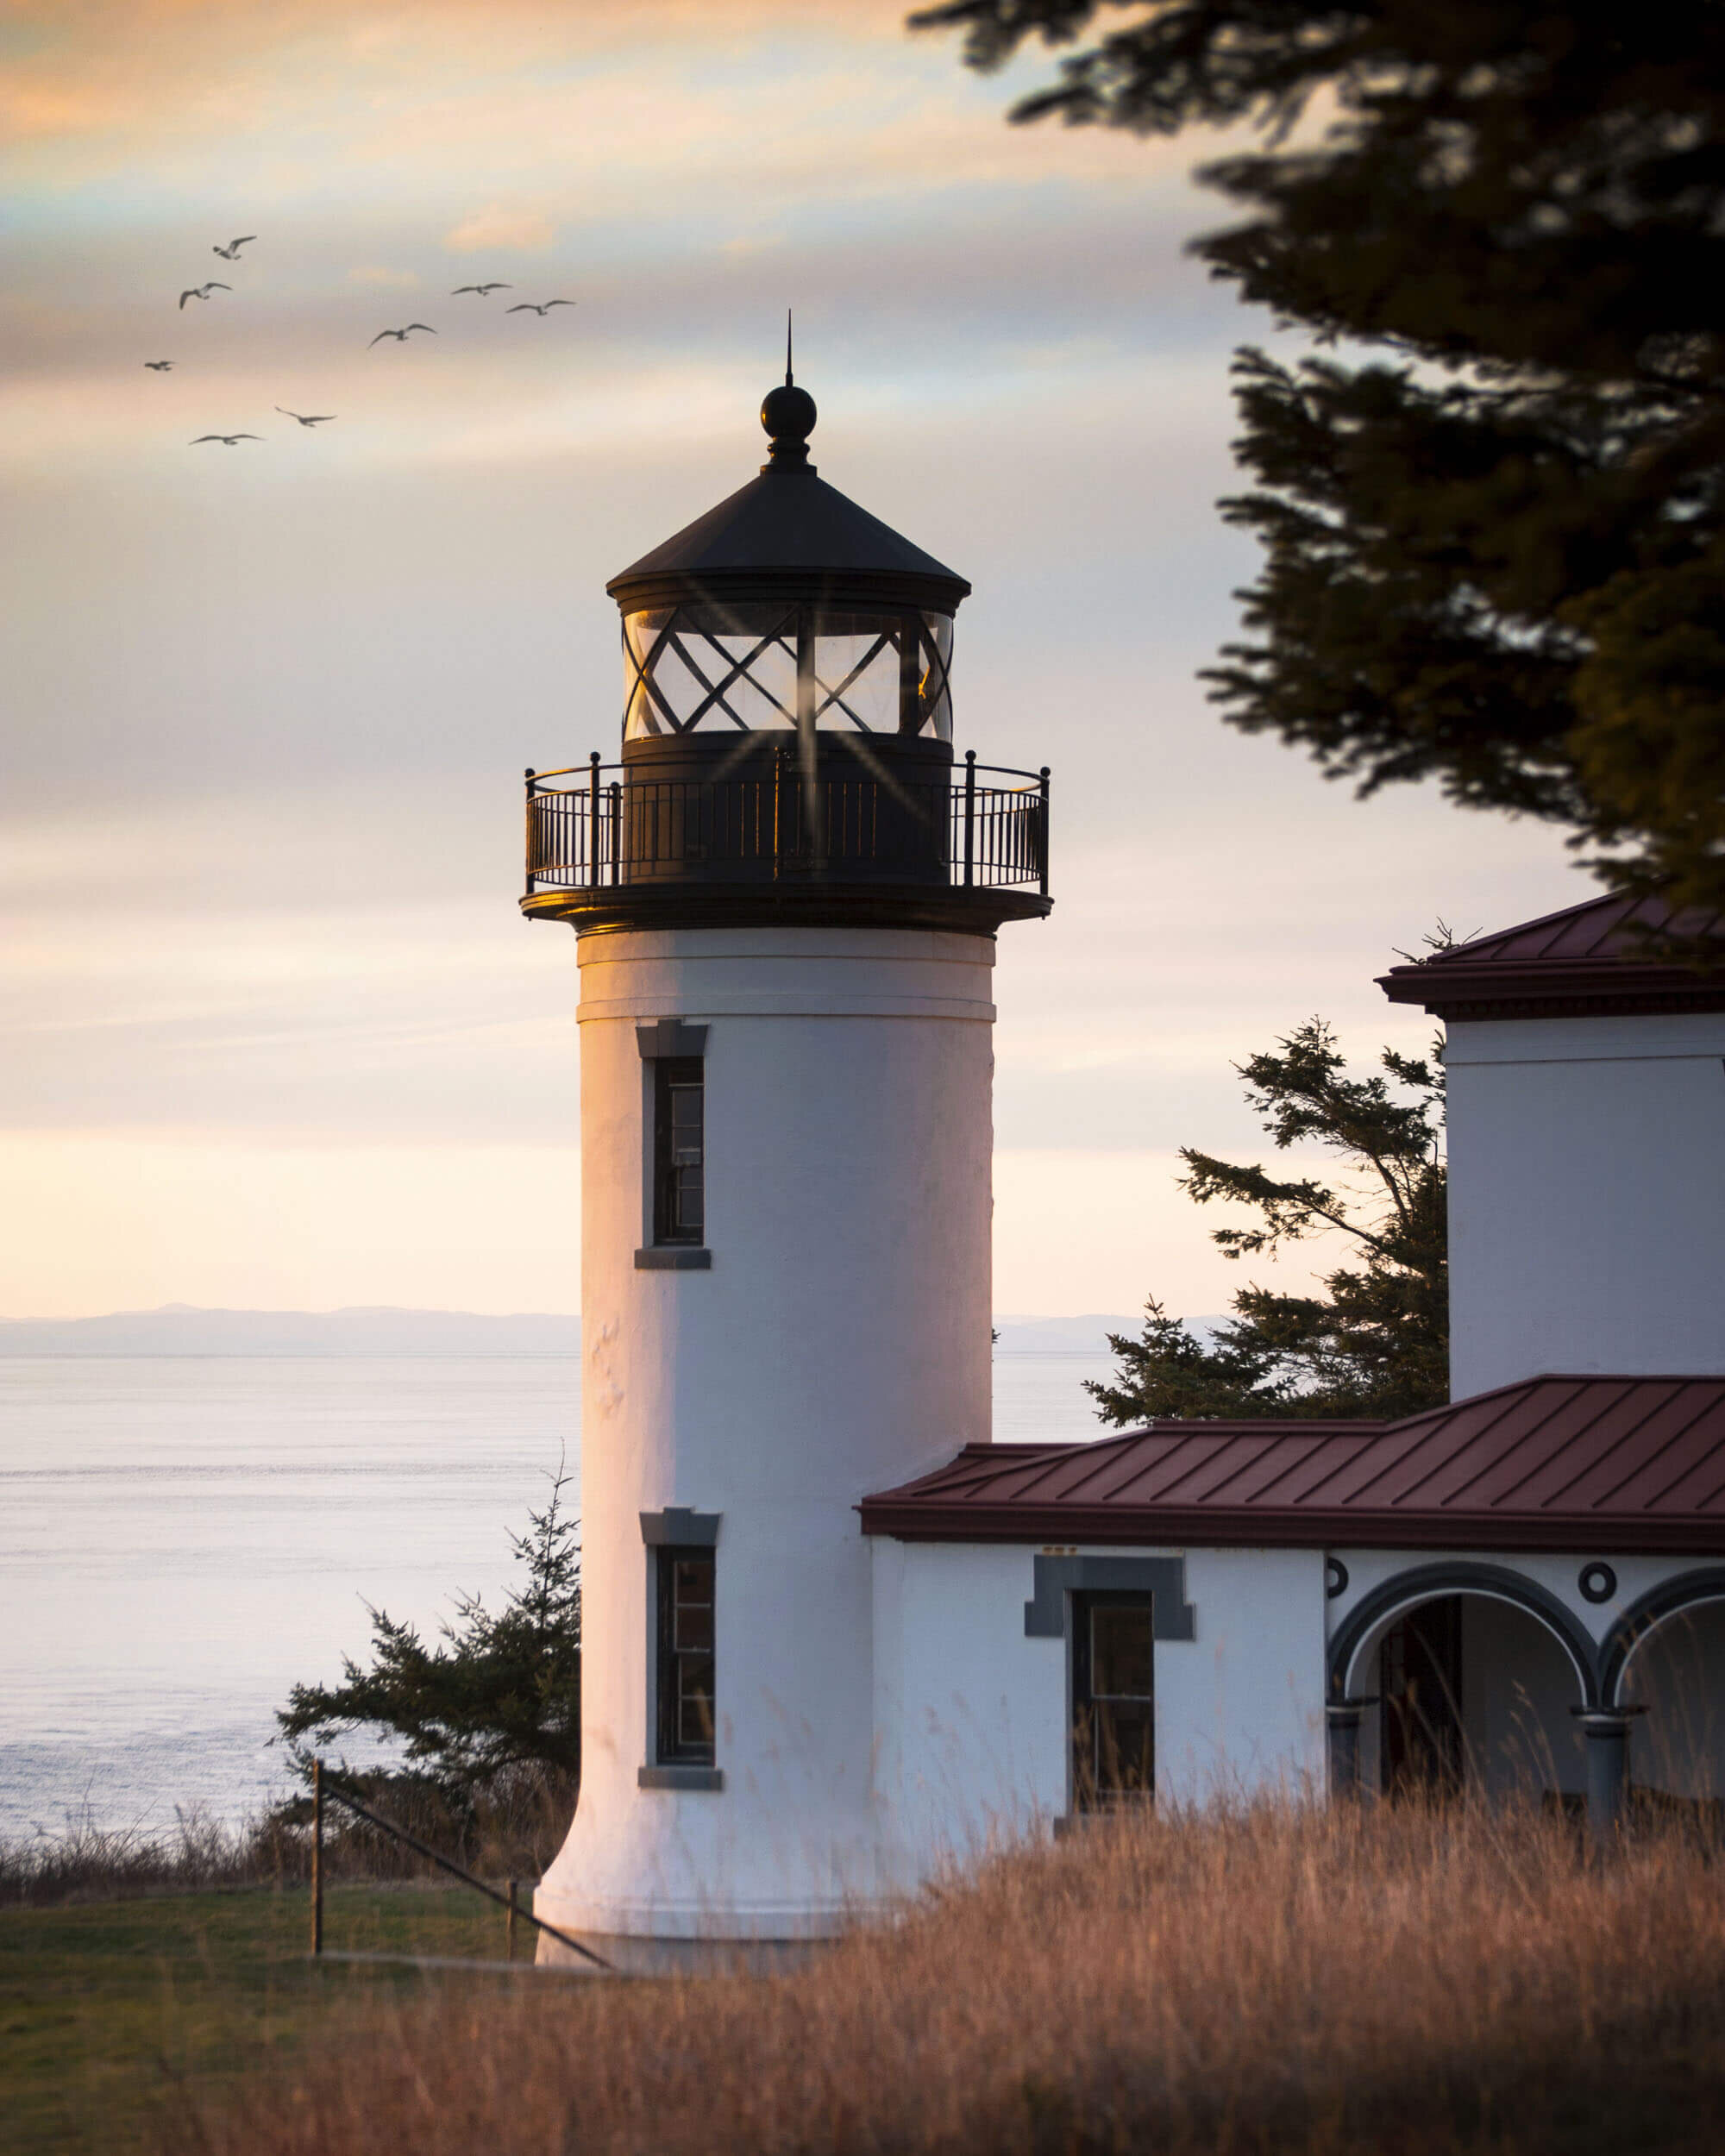 Admiralty Head Lighthouse is located in Fort Casey State Park and makes for a nice sunset subject.